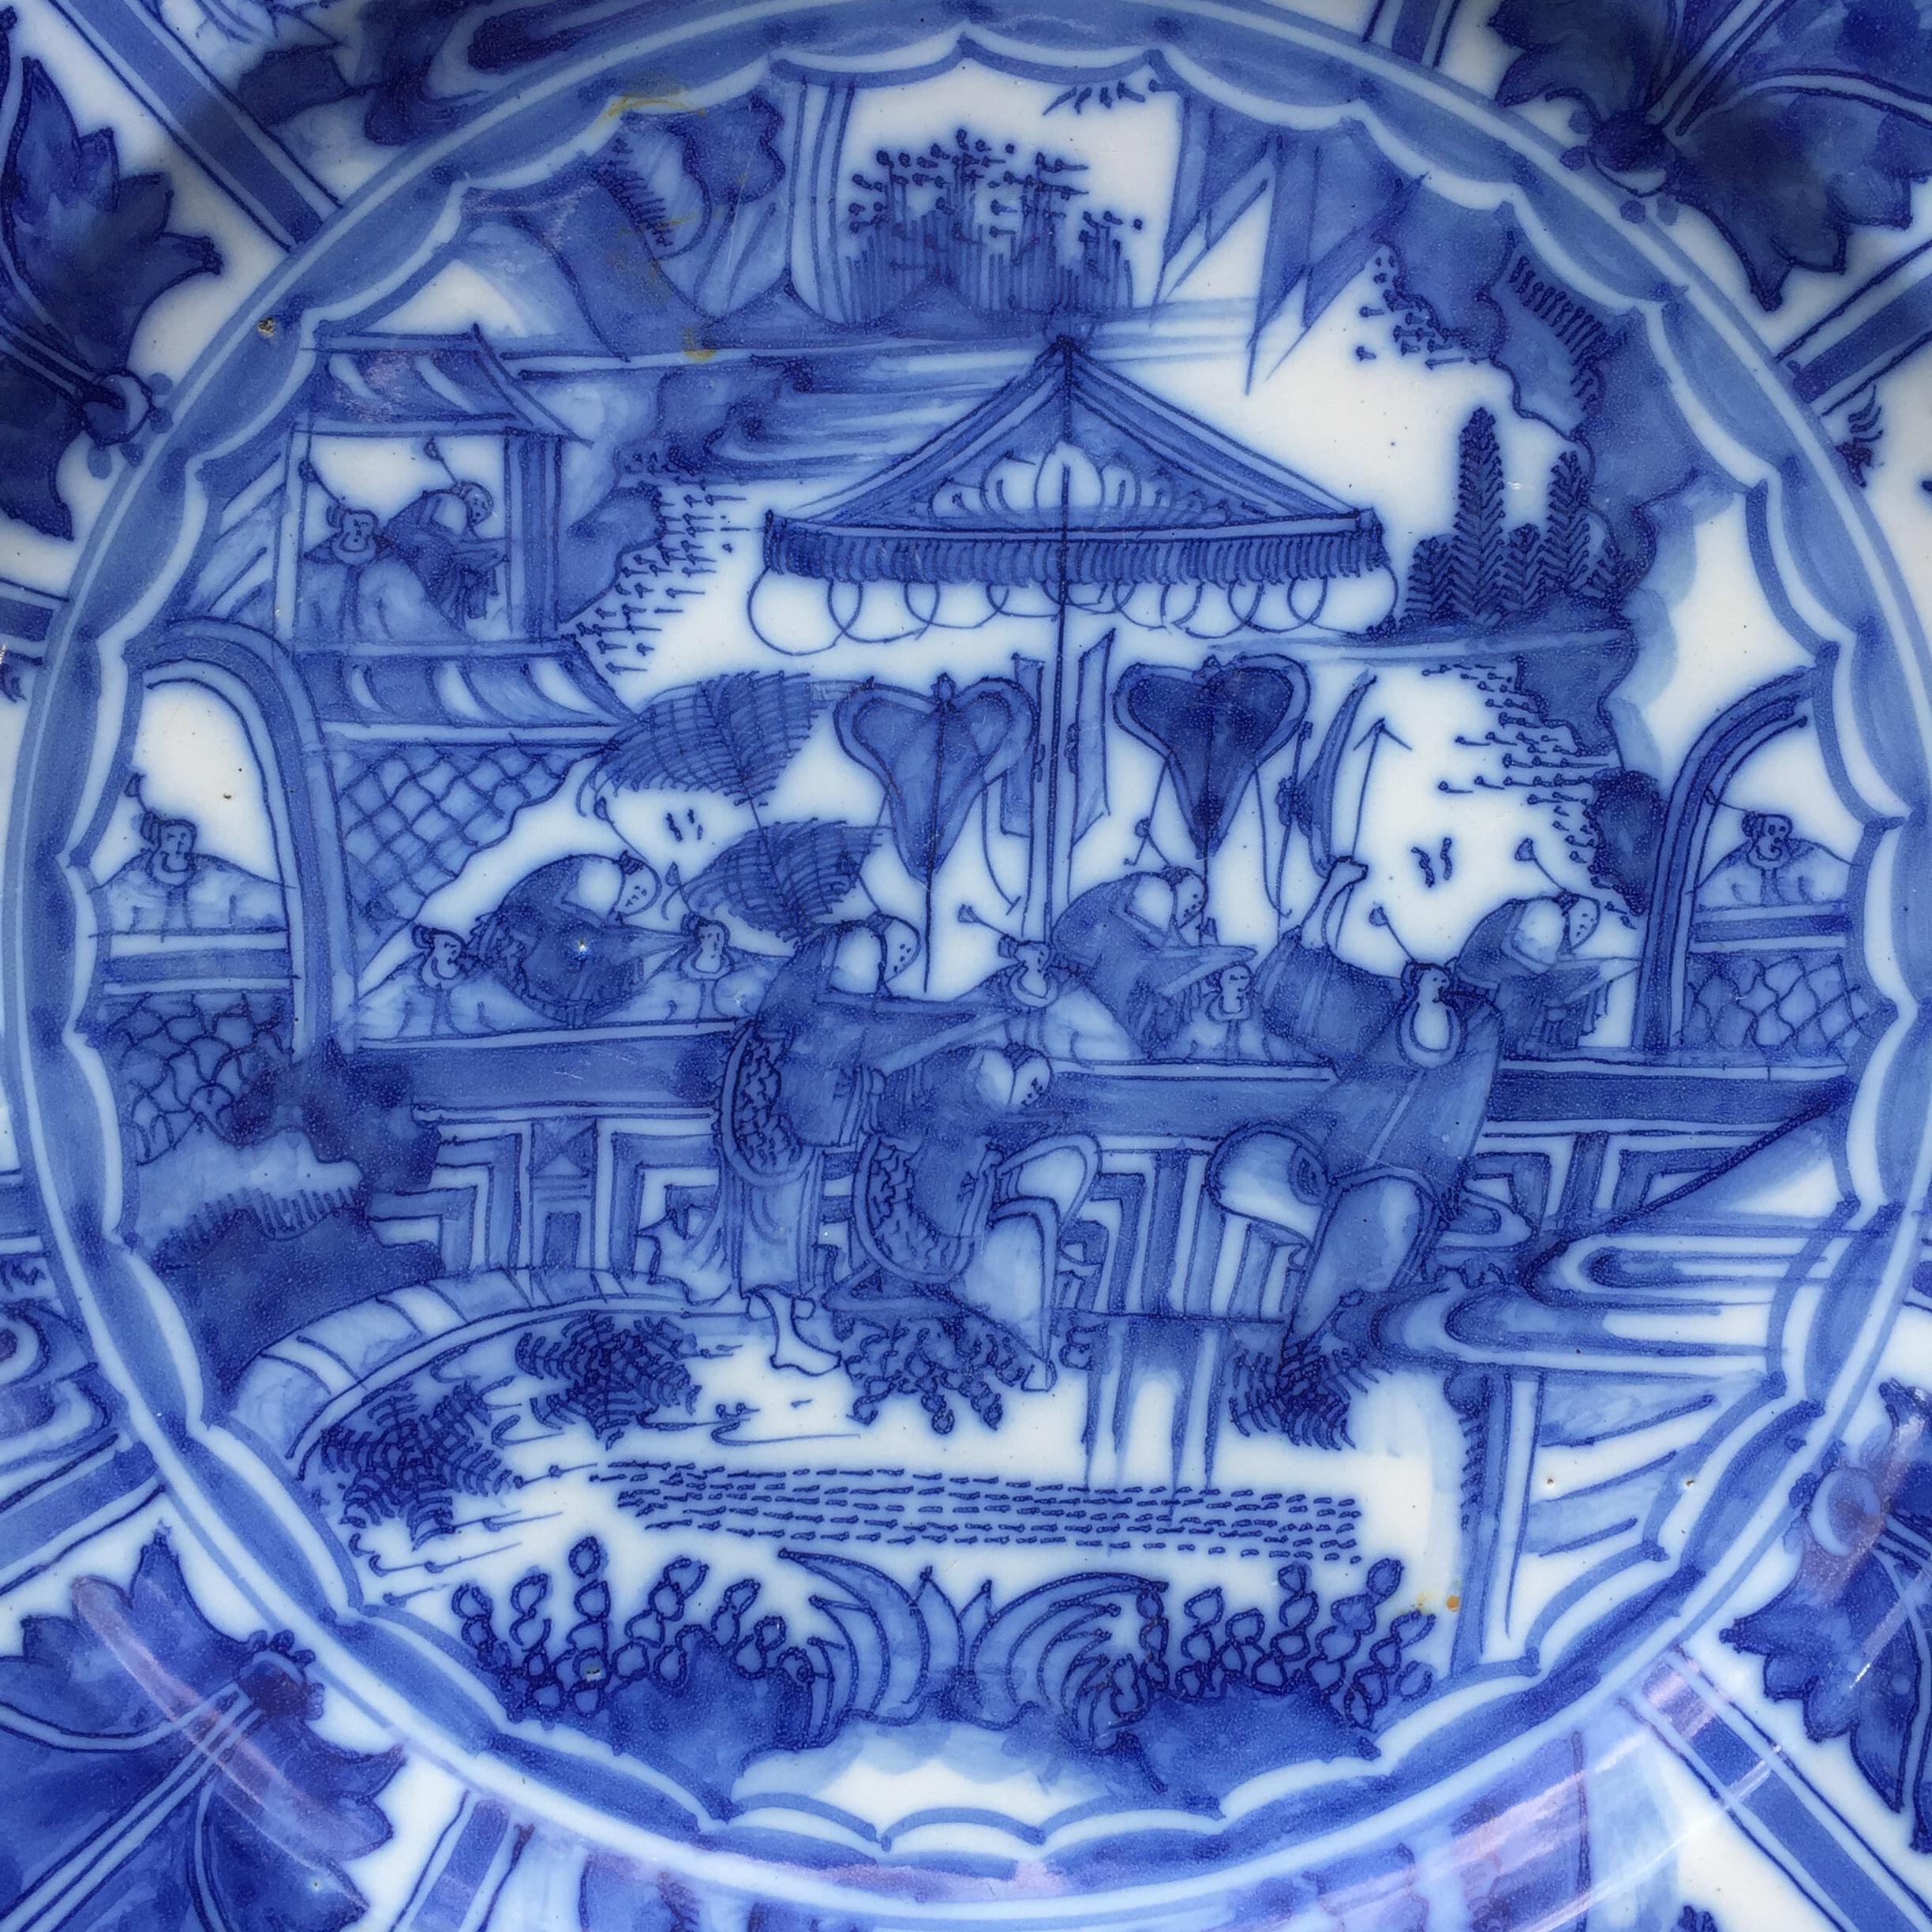 City: Delft
Workshop: Unknown
Date: circa 1670 - 1680

A wonderful bright delft plate or charger with decoration in the Chinese Wanli style.
Massive piece you don't see every day!

Unmarked